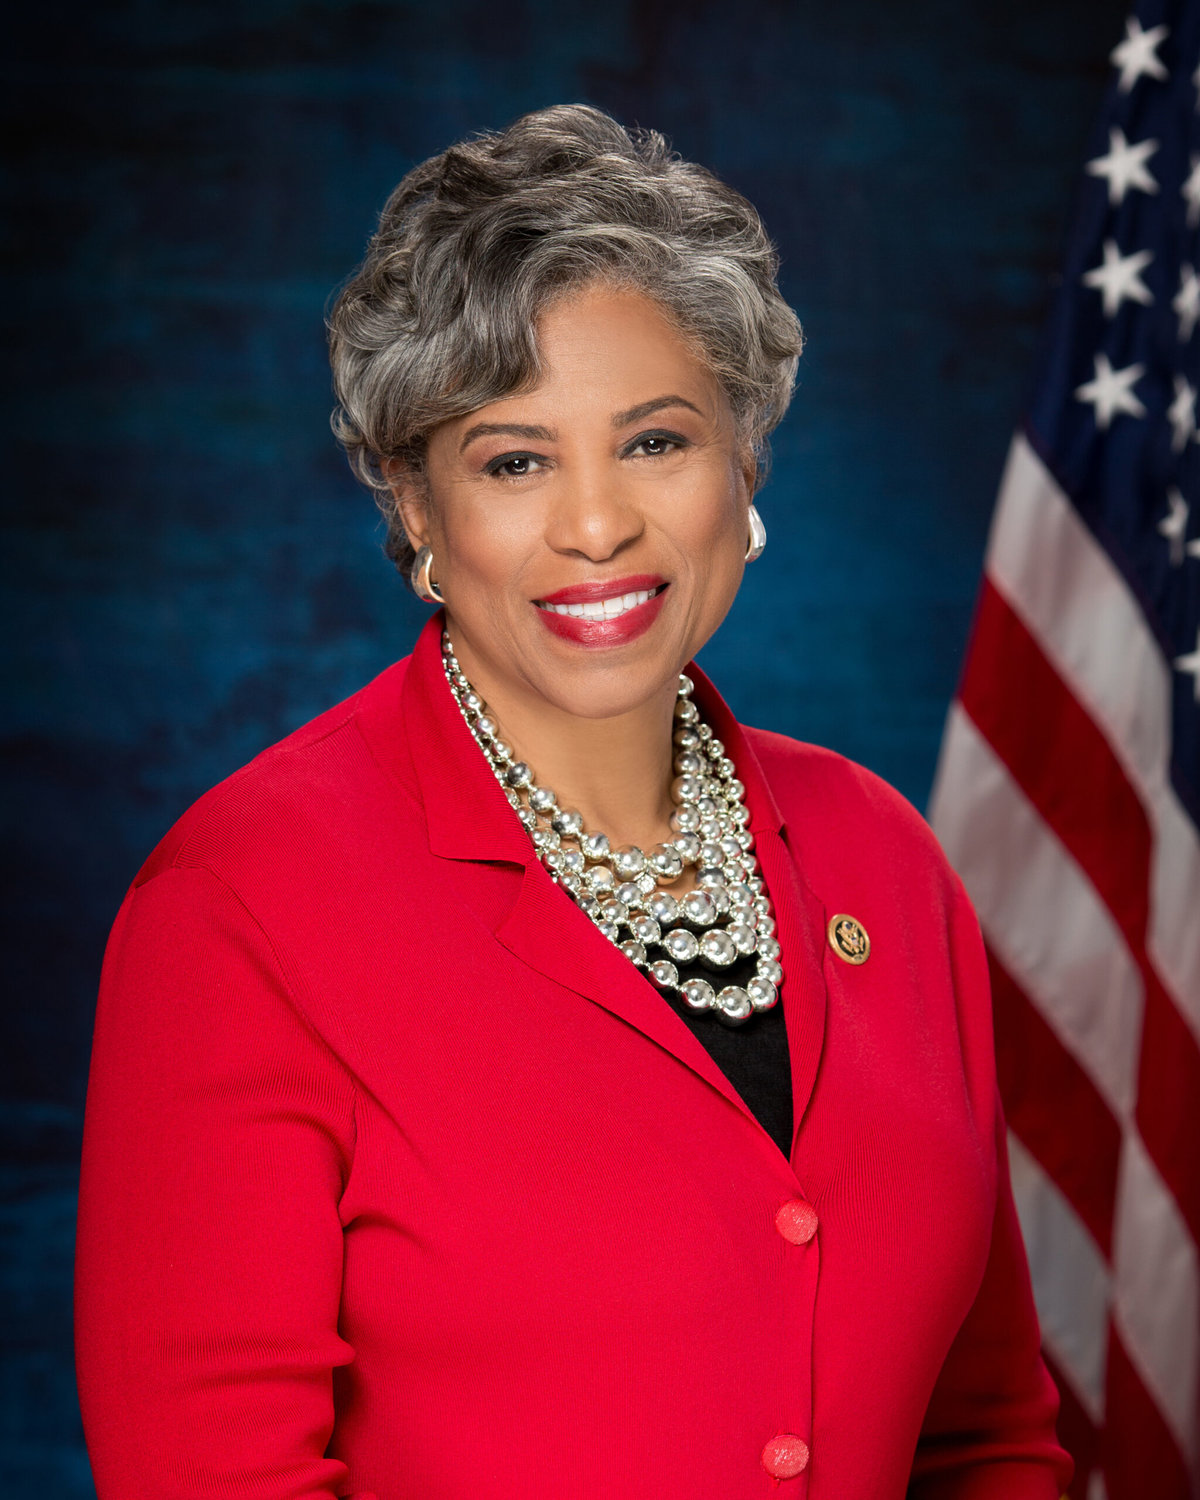 U.S. Rep. Brenda Lawrence, D-Southfield, will not seek a fifth term after redistricting.